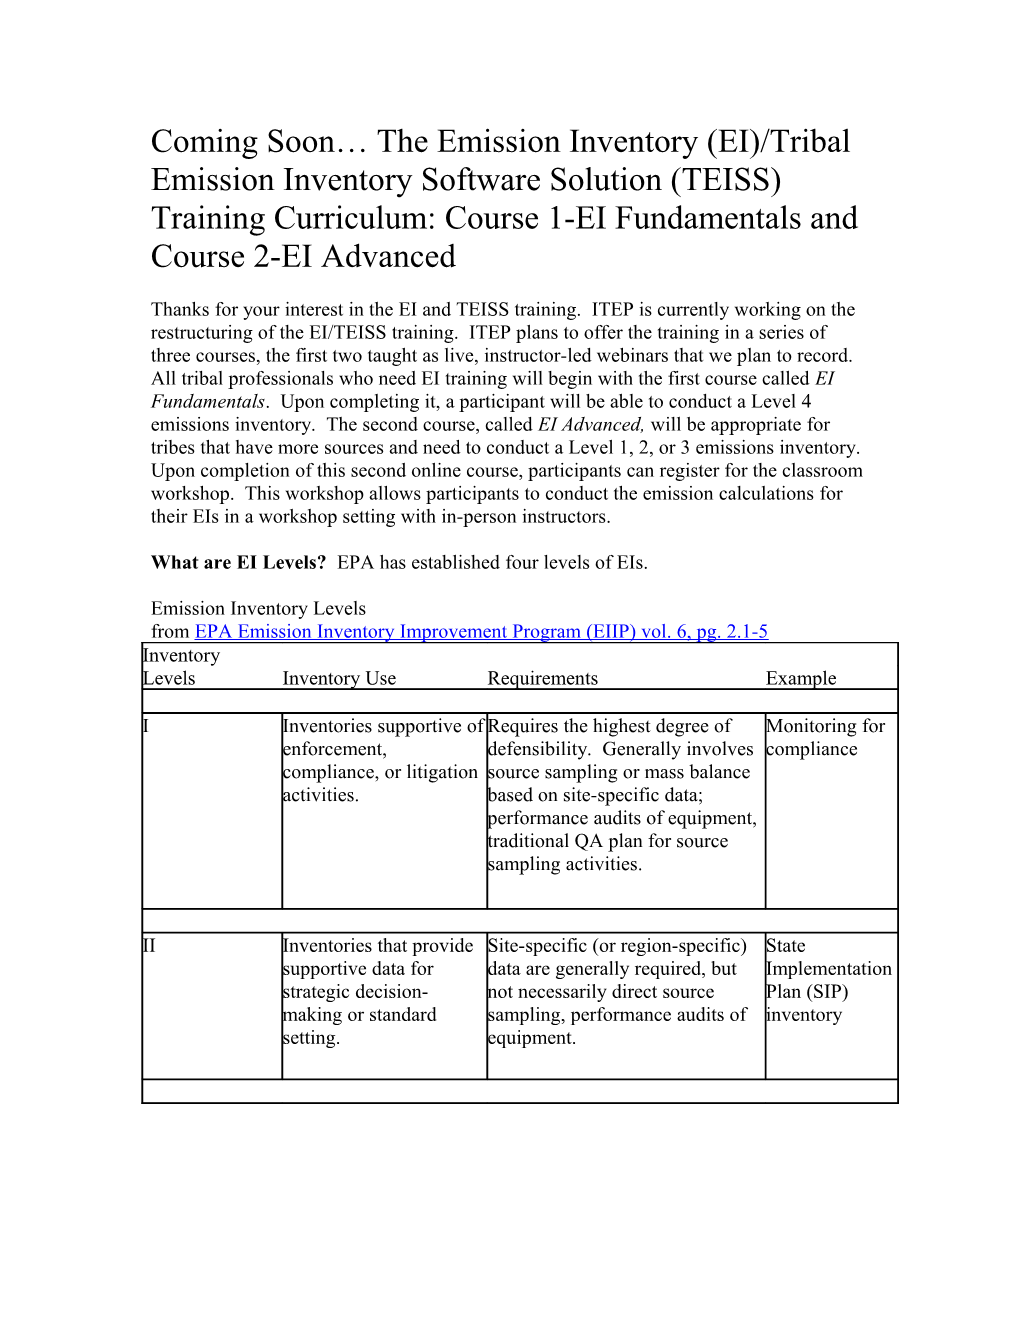 Coming Soon the Emission Inventory (EI)/Tribal Emission Inventory Software Solution (TEISS)